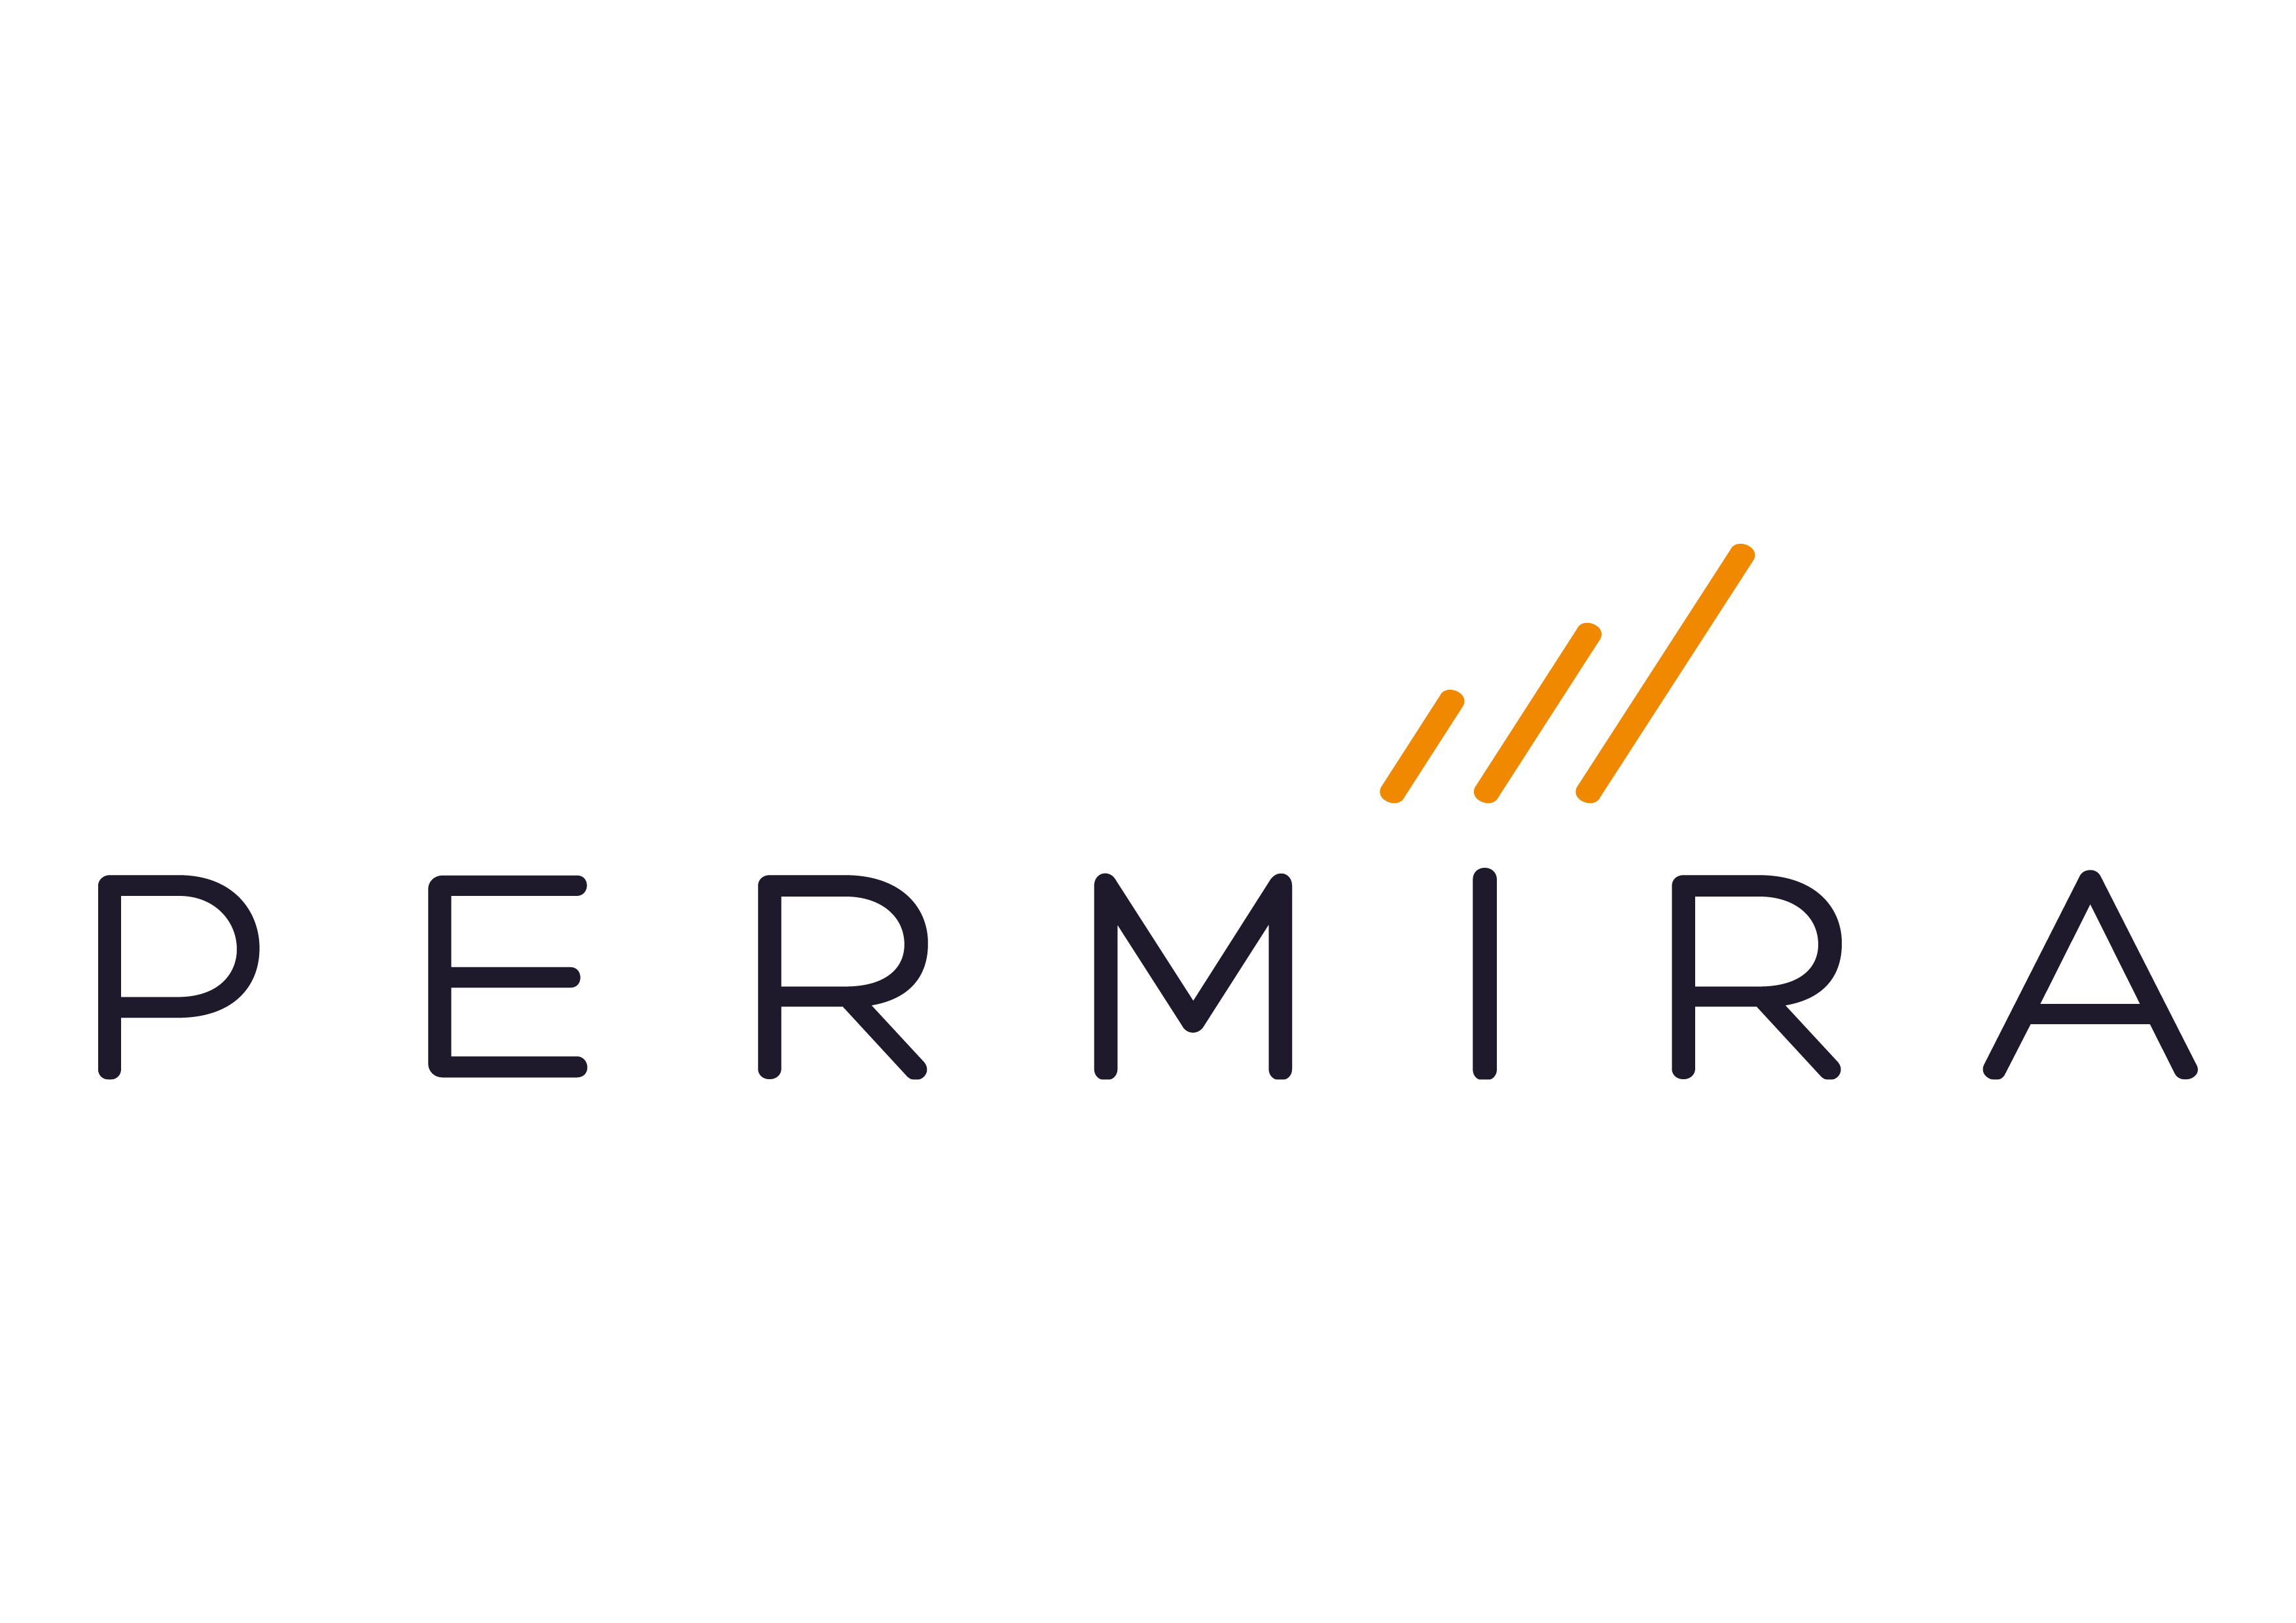 Permira, a global investment firm, has established a dedicated team to identify investment opportunities in the climate transition sector.